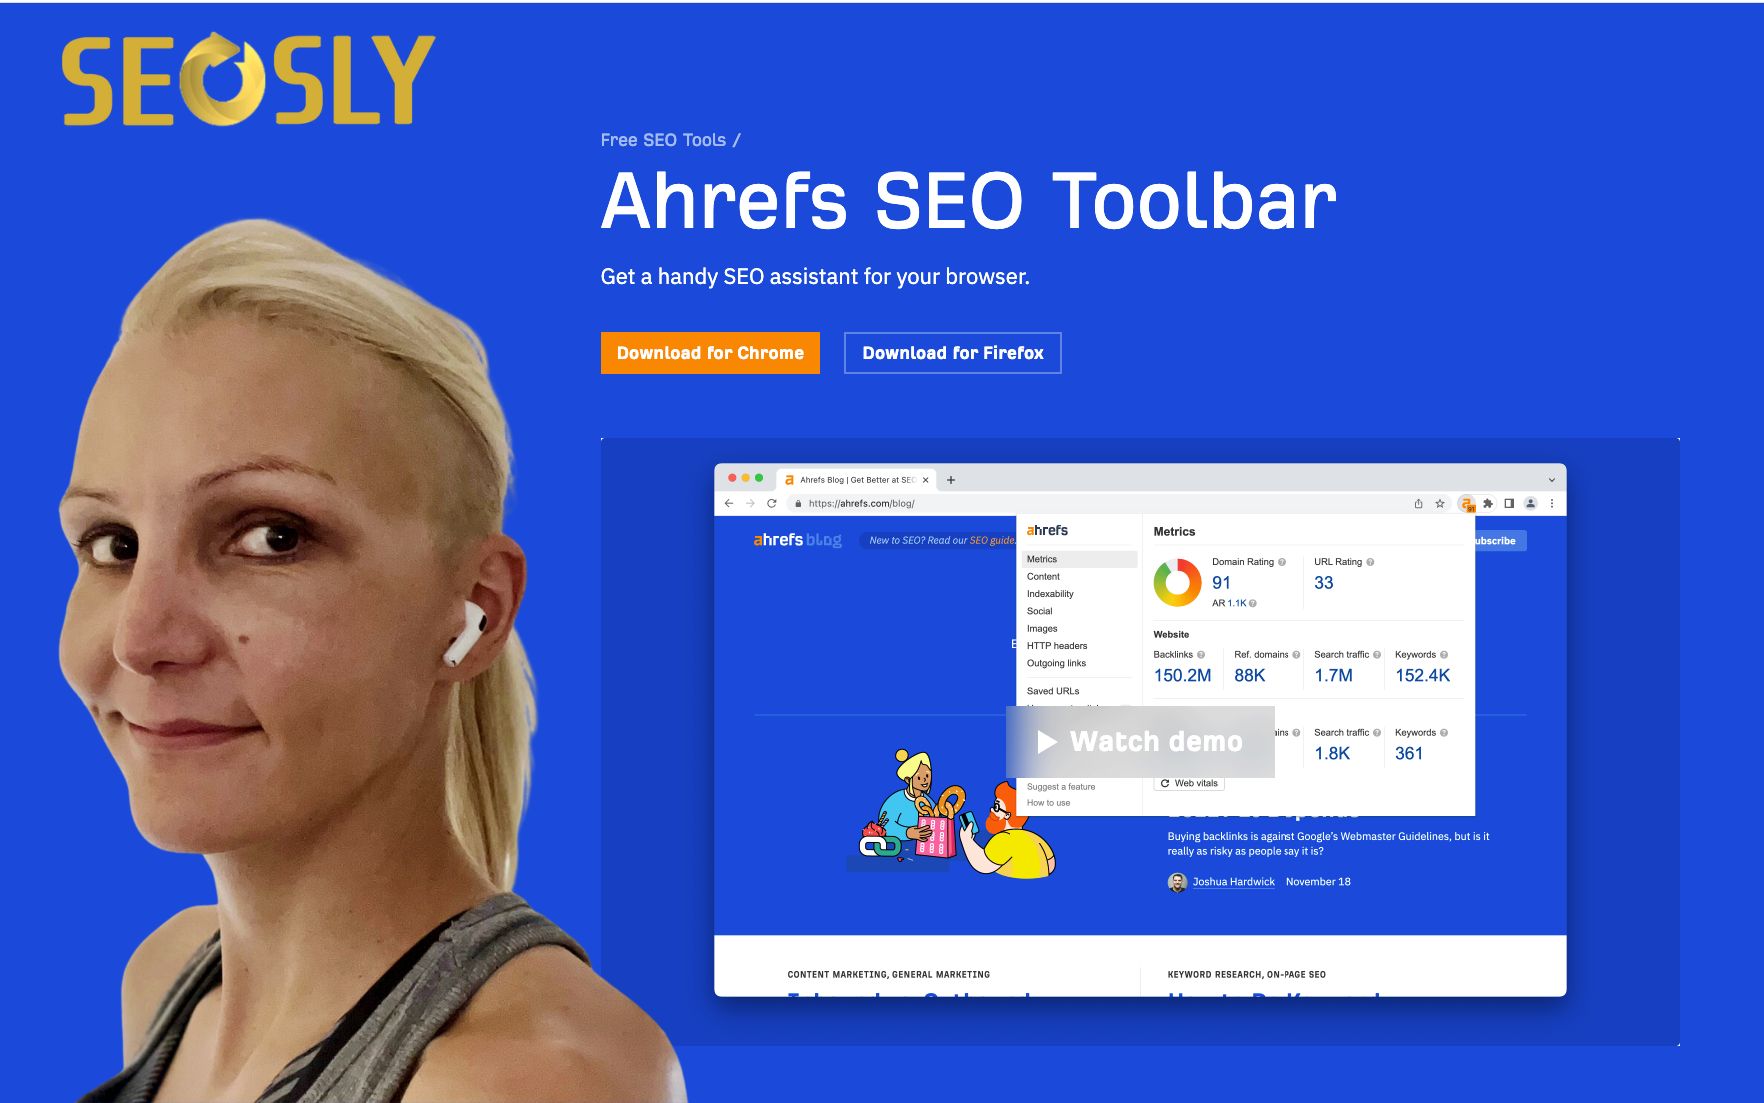 Ahrefs SEO Toolbar: One SEO Extension To Rule Them All | SEOSLY